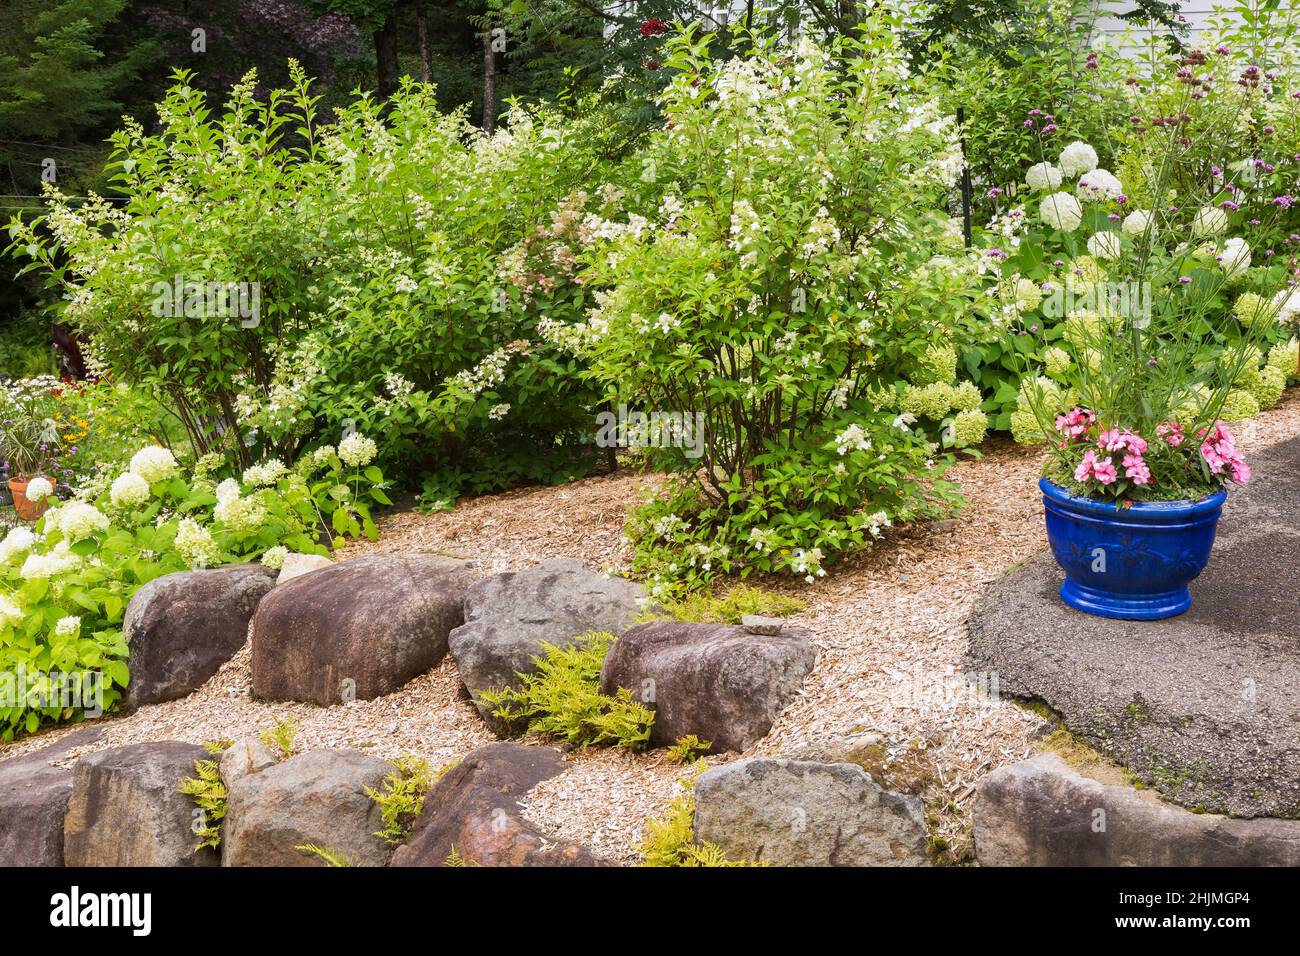 Hydrangea arborescens 'Annabelle', paniculata shrubs in raised rock edged mulch border and blue ceramic planter with pink Impatiens - Balsam flowers. Stock Photo